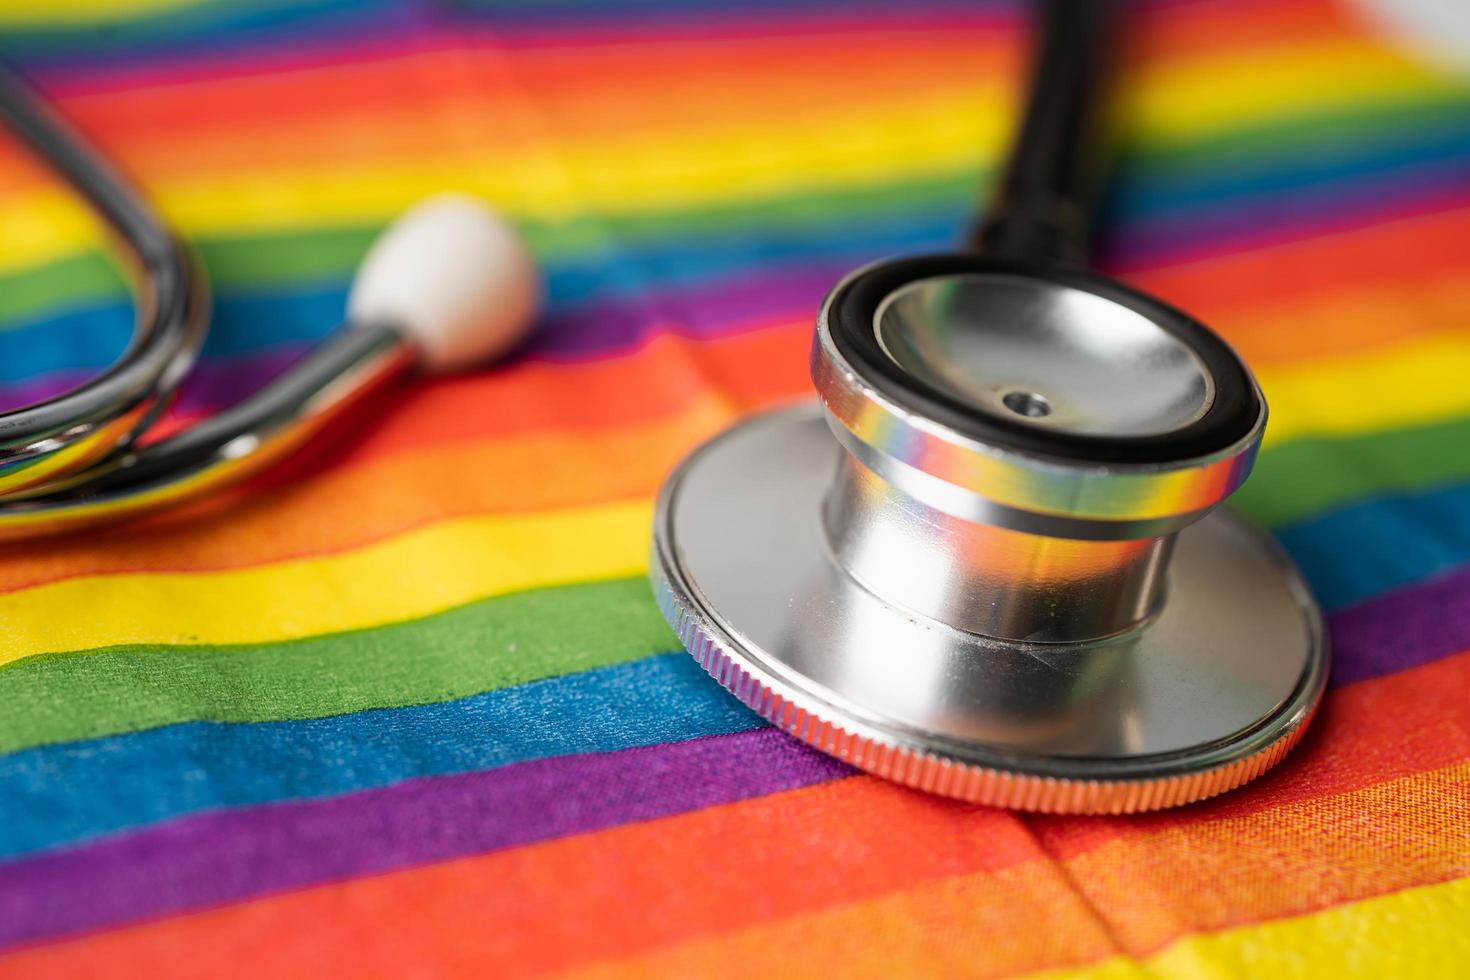 Black stethoscope on rainbow flag background, symbol of LGBT pride month celebrate annual in June social, symbol of gay, lesbian, bisexual, transgender, human rights and peace. photo